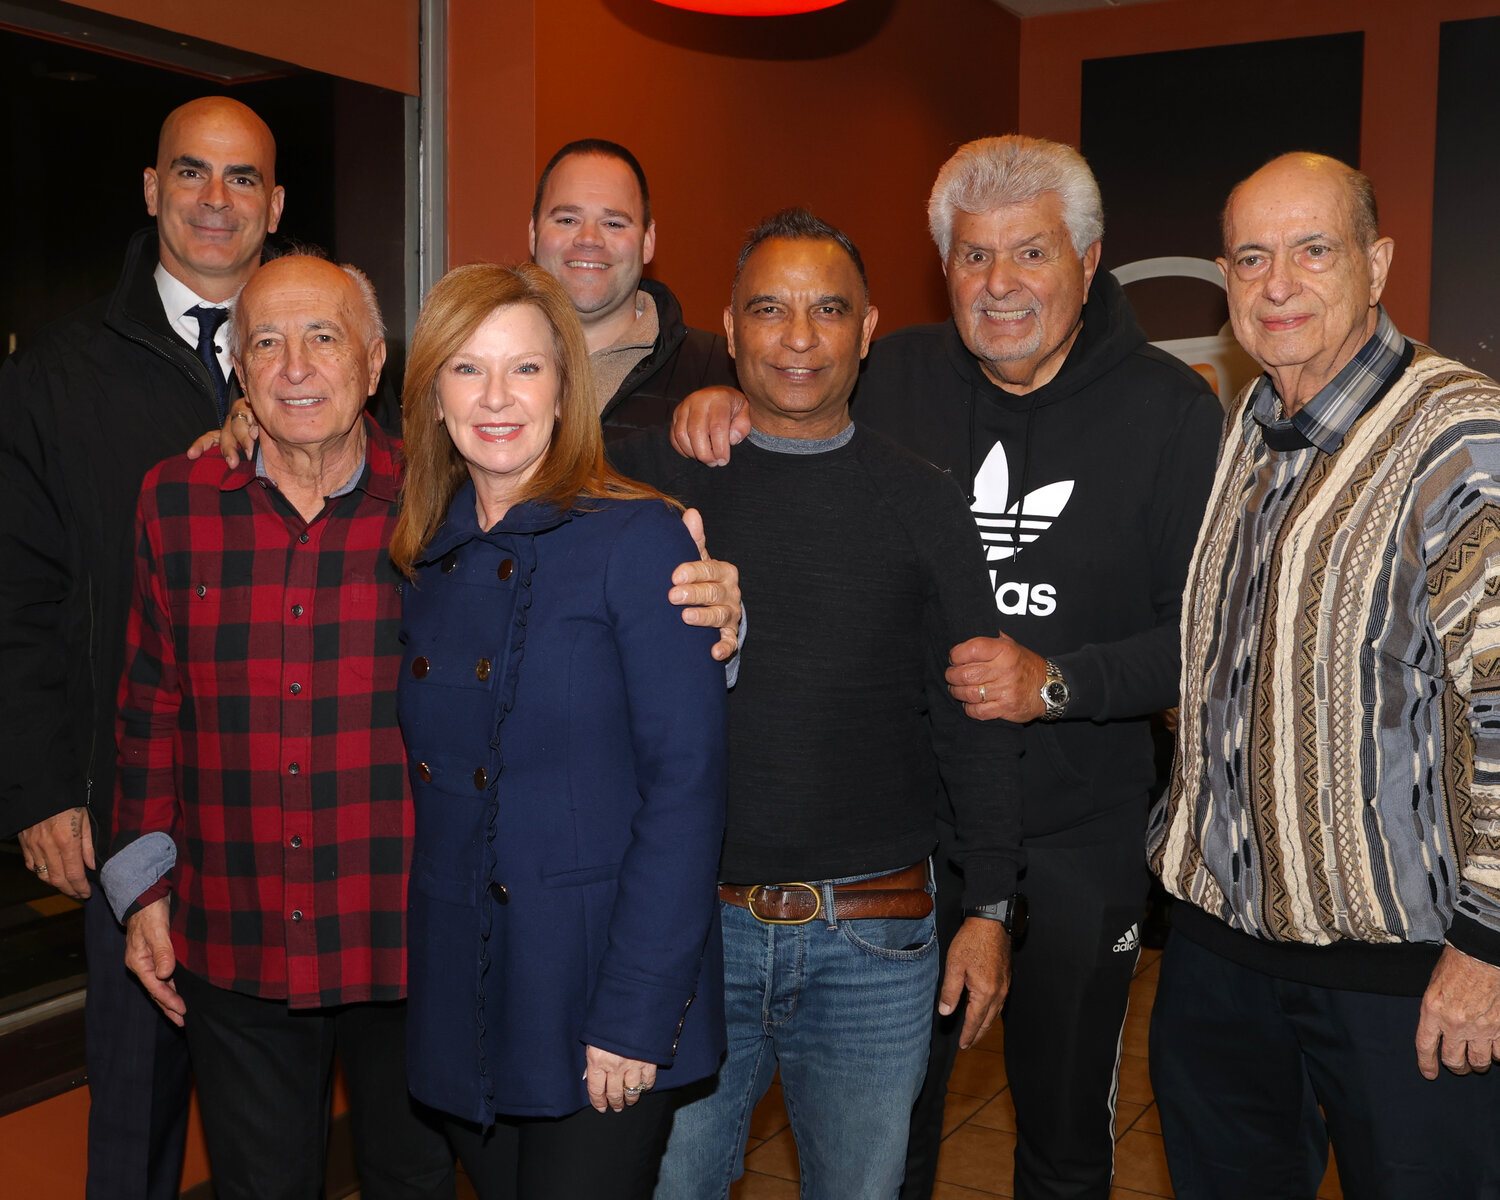 More locals are gathering for Dunkin’ doo-wop nights in Oceanside. At the most recent session were, from left, County Legislator Patrick Mullaney, Michael Campiglia, Councilwoman Laura Ryder, Mike Graham, Dunkin’ Owner Rocky Sheikh, Jimmy LaMarca and Oceanside Chamber of Commerce board member Joe Ponte.